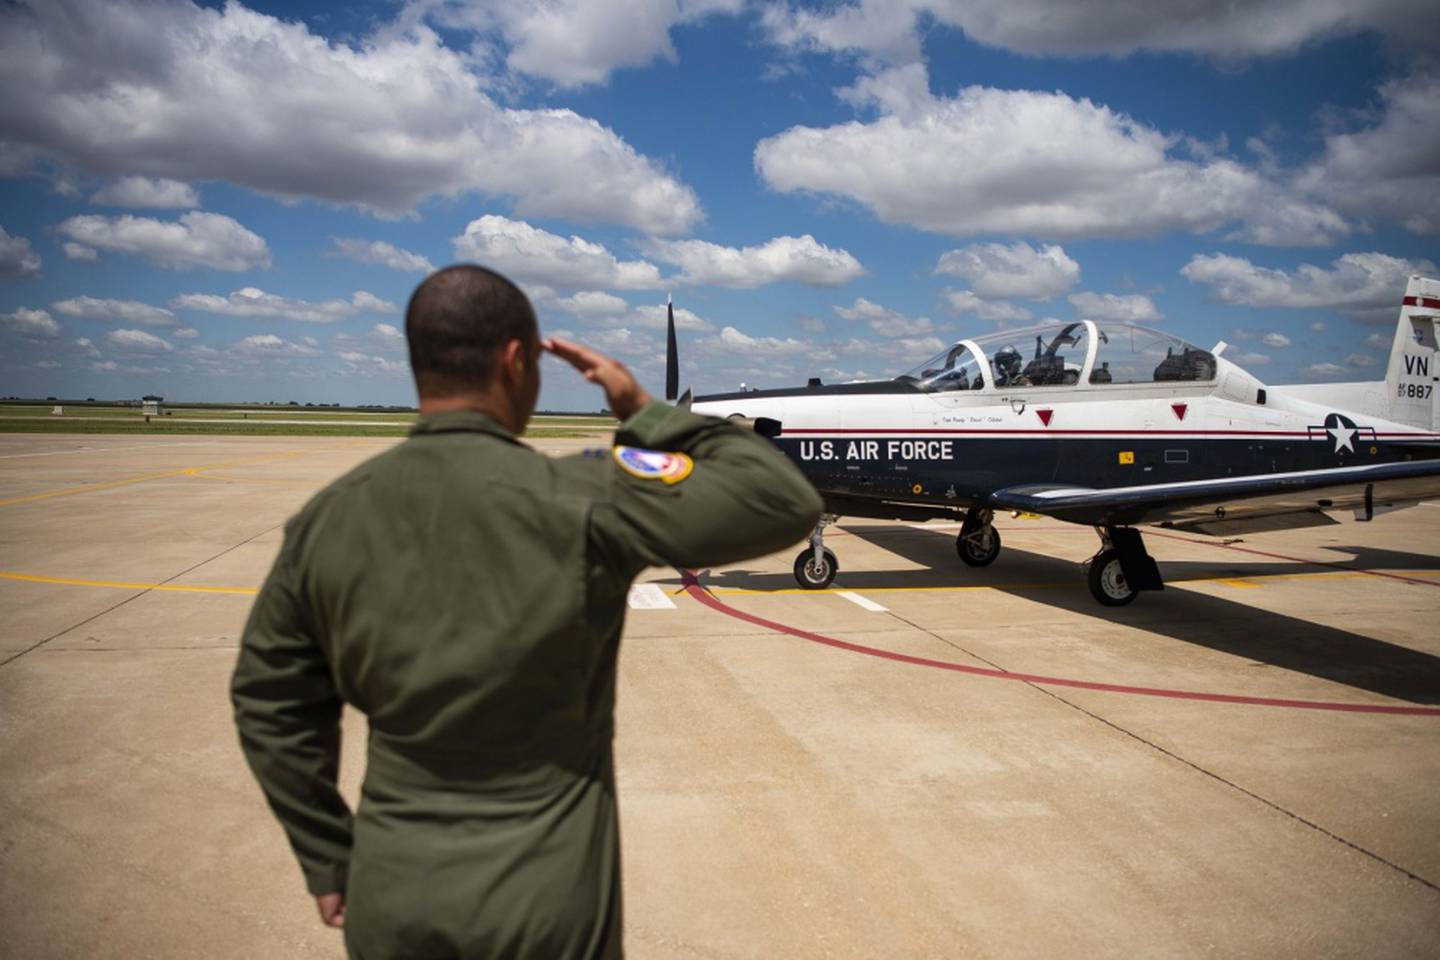 Capt. Marcel Trott, a flight commander assigned to the 71st Student Squadron, salutes 2nd Lt. Corey Persons, a student pilot assigned to the 71st SS, before his solo flight July 15, 2019, at Vance Air Force Base, Oklahoma. (Air Force/SrA Taylor Crul)